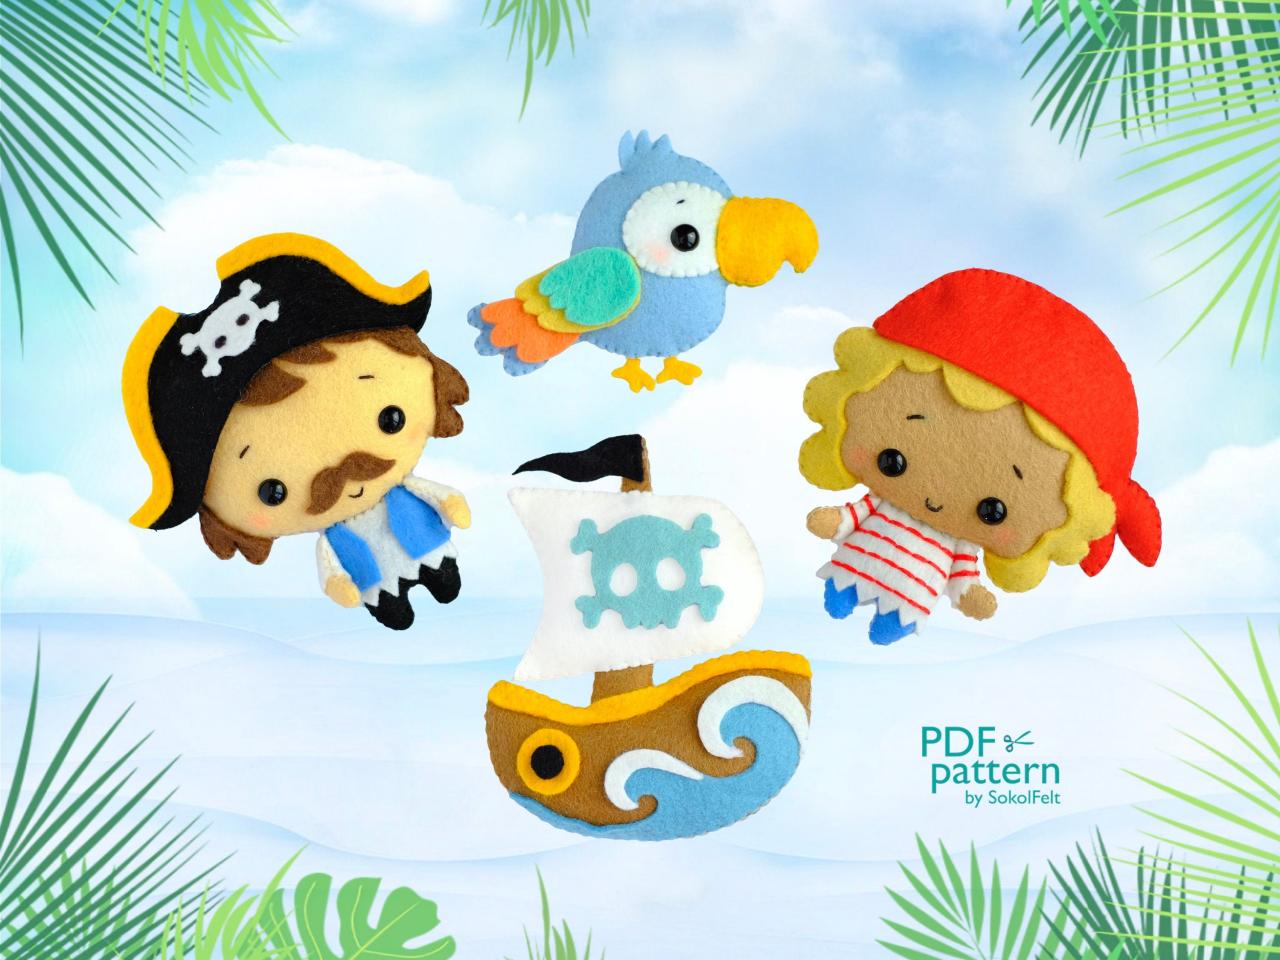 Cute Pirates, Parrot and Ship felt toy PDF and SVG patterns, Plush toy sewing PDF tutorial, baby crib mobile toy, Pirate banner